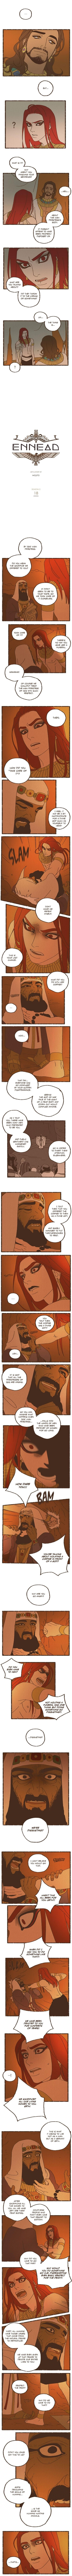 Ennead - Page 1